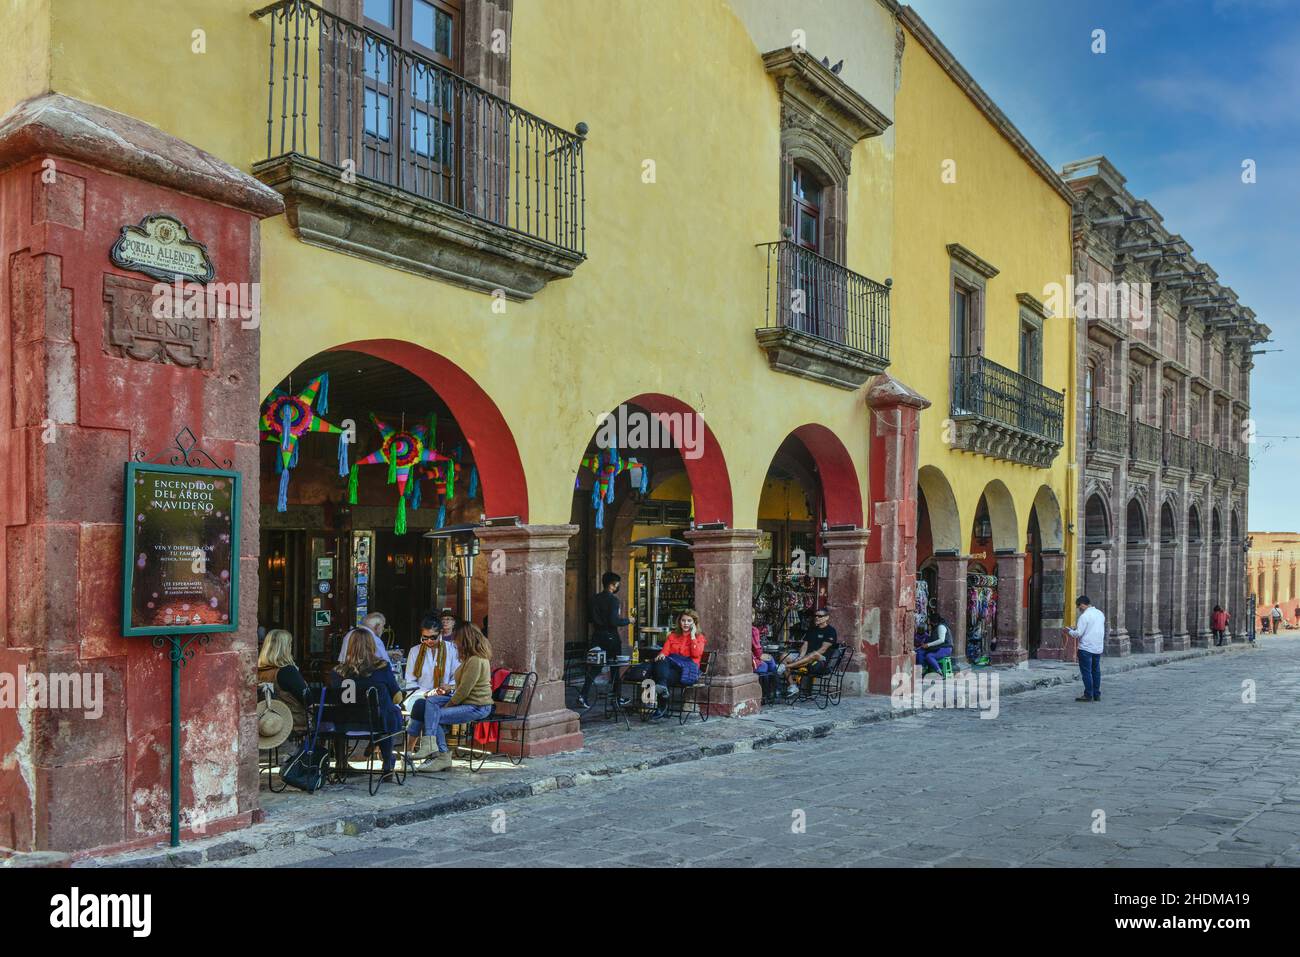 People relax around the outdoor cafes and restaurants in the central district along the portal Allende, in the colonial San Miguel de Allende, MX Stock Photo